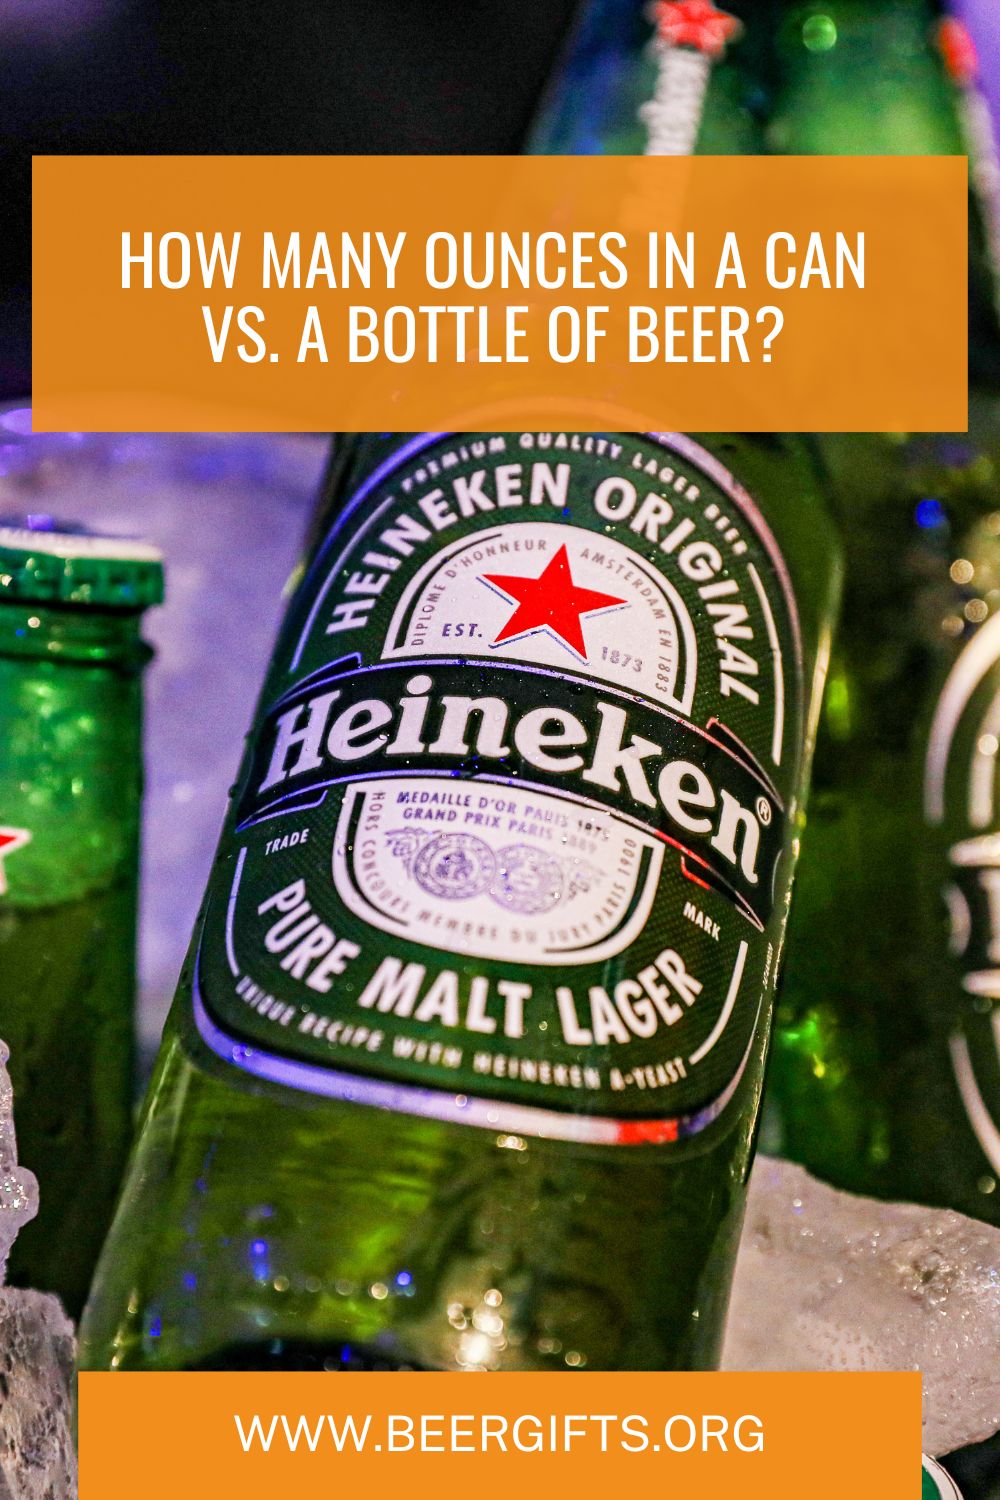 How Many Ounces in a Can vs. a Bottle of Beer?